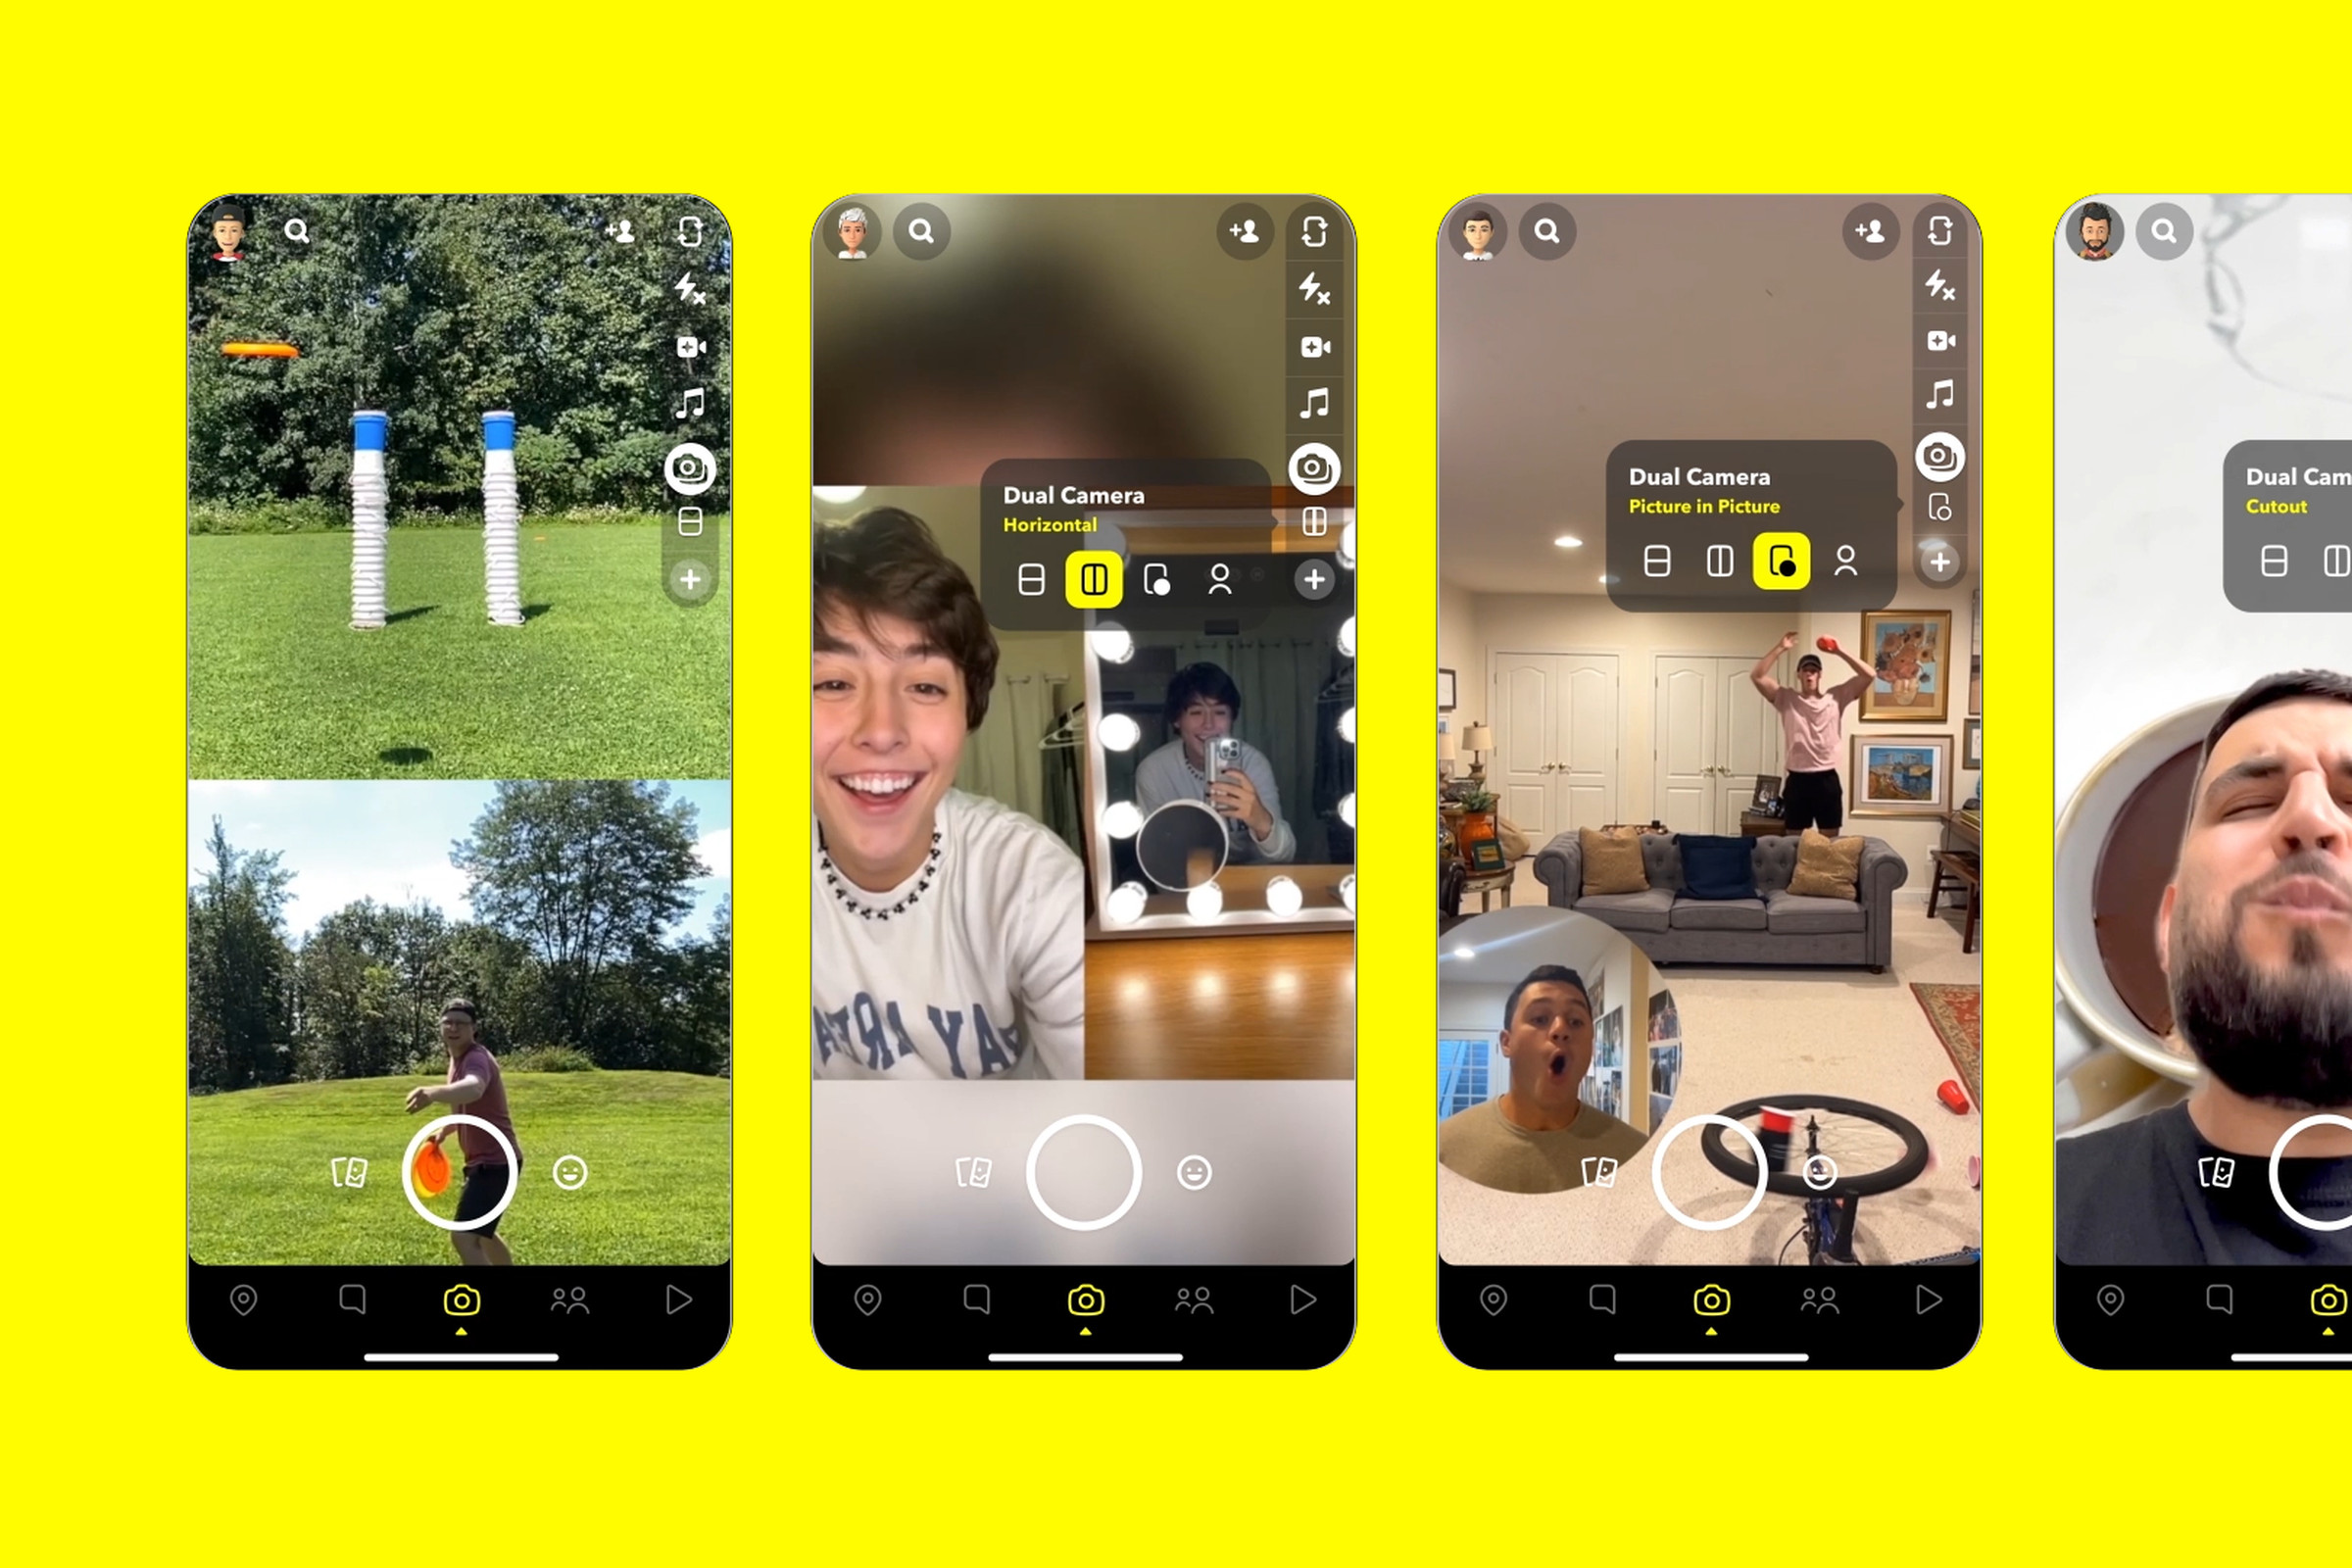 Four Snapchat screens showing different layouts of the dual camera feature.